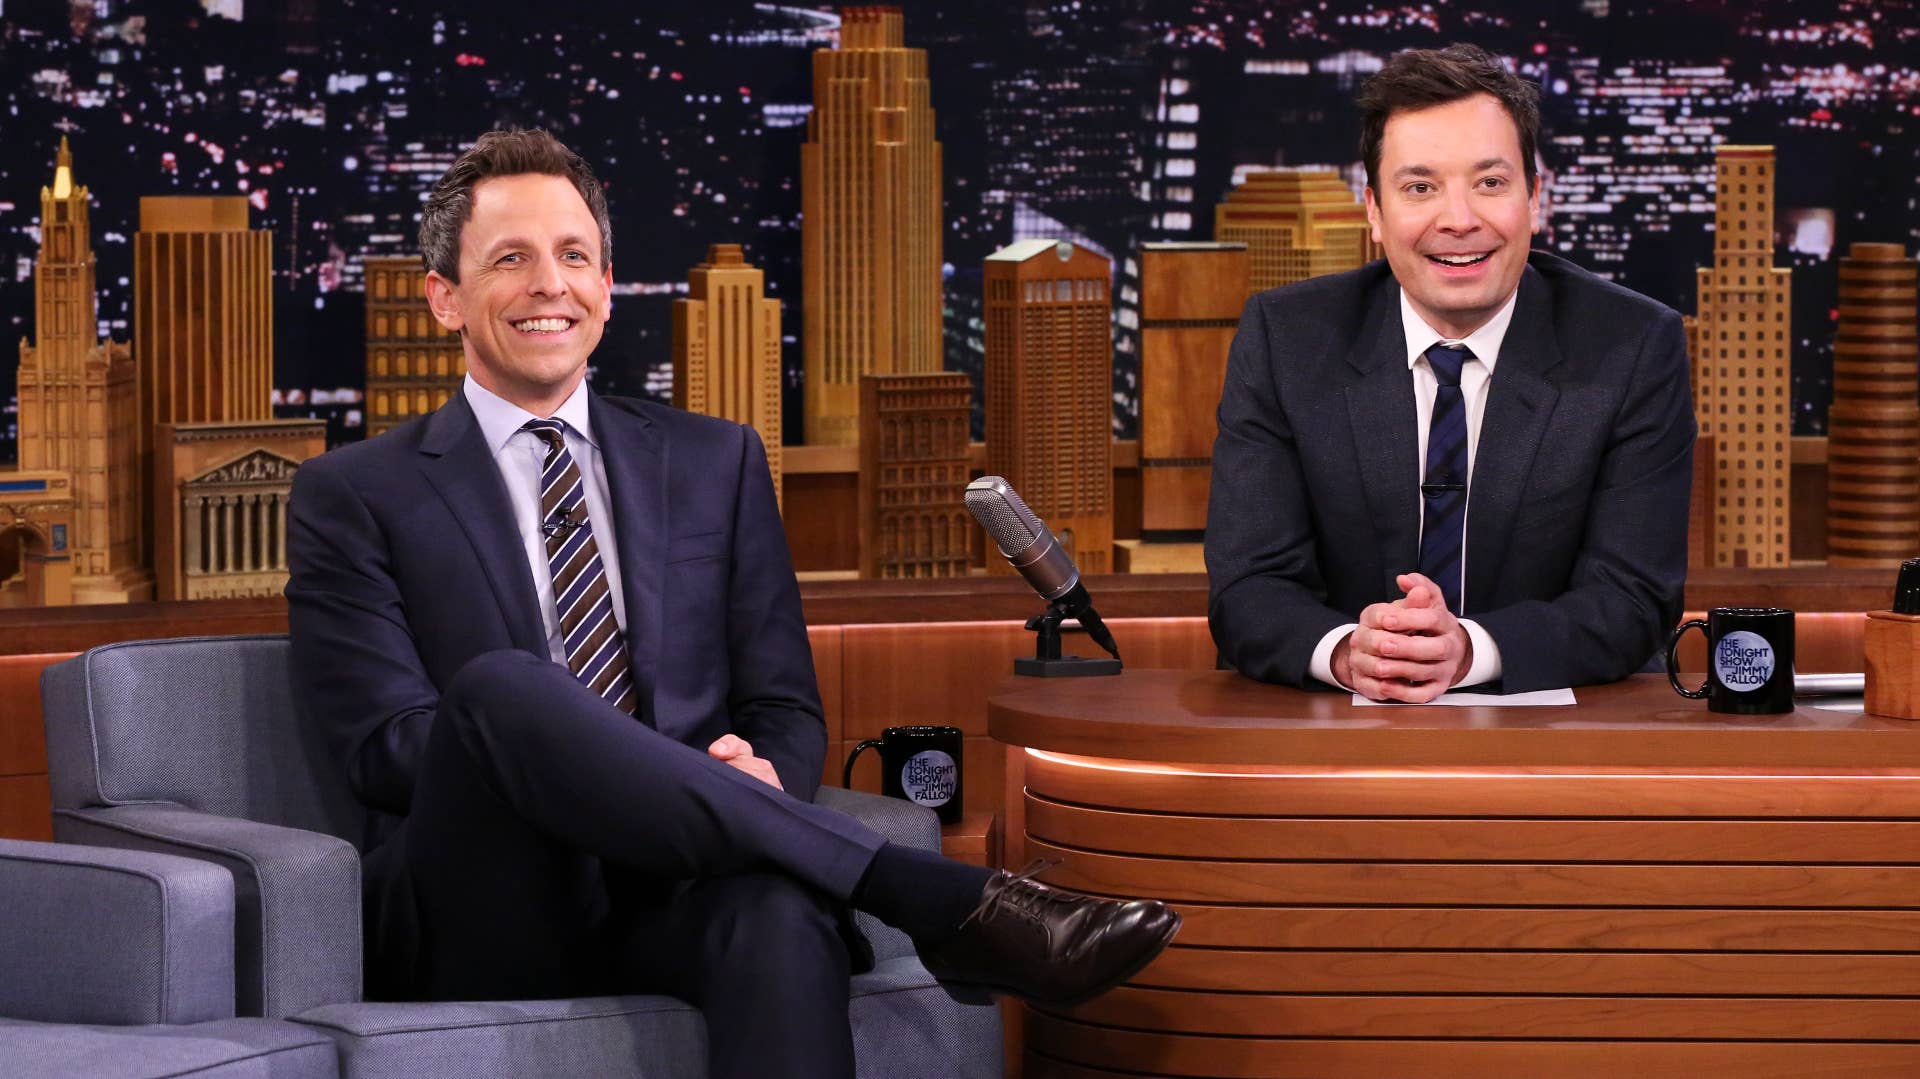 Seth Meyers during an interview with host Jimmy Fallon.